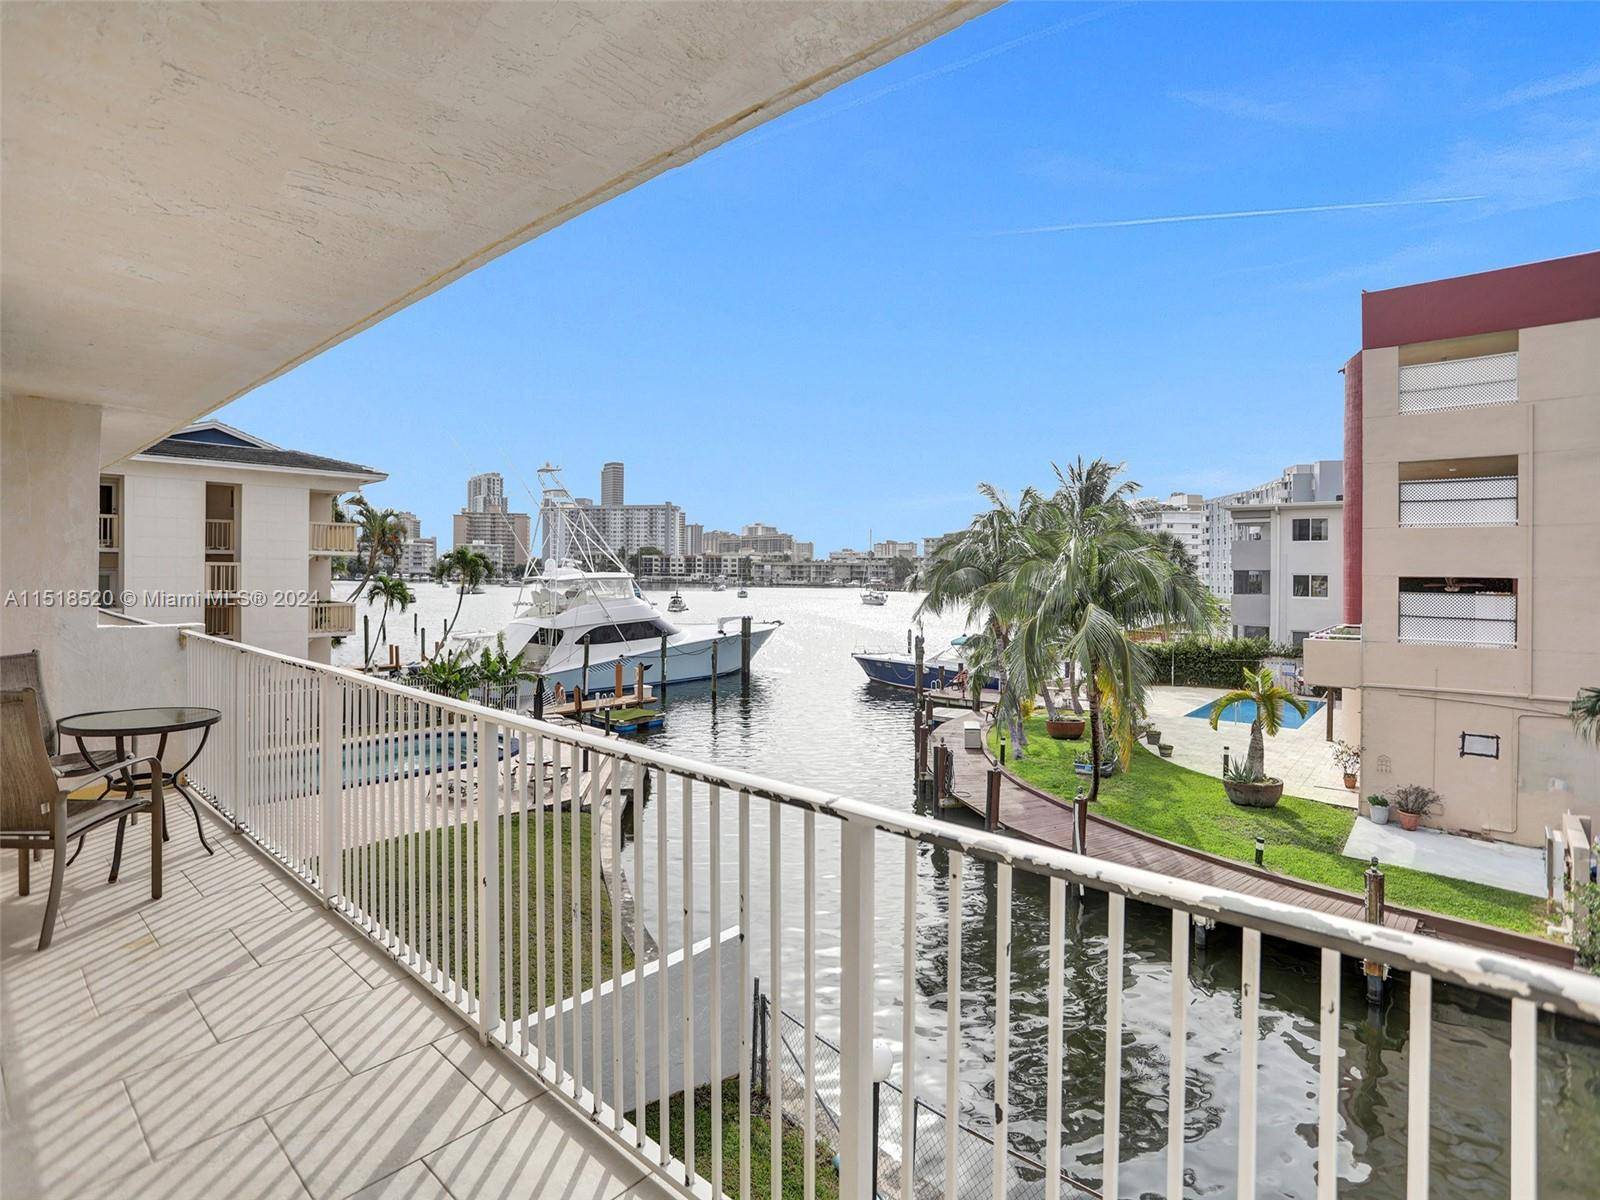 Beautiful Water Views from the living area, bedroom, and wraparound balcony are just part of the charm of this updated spacious condo.